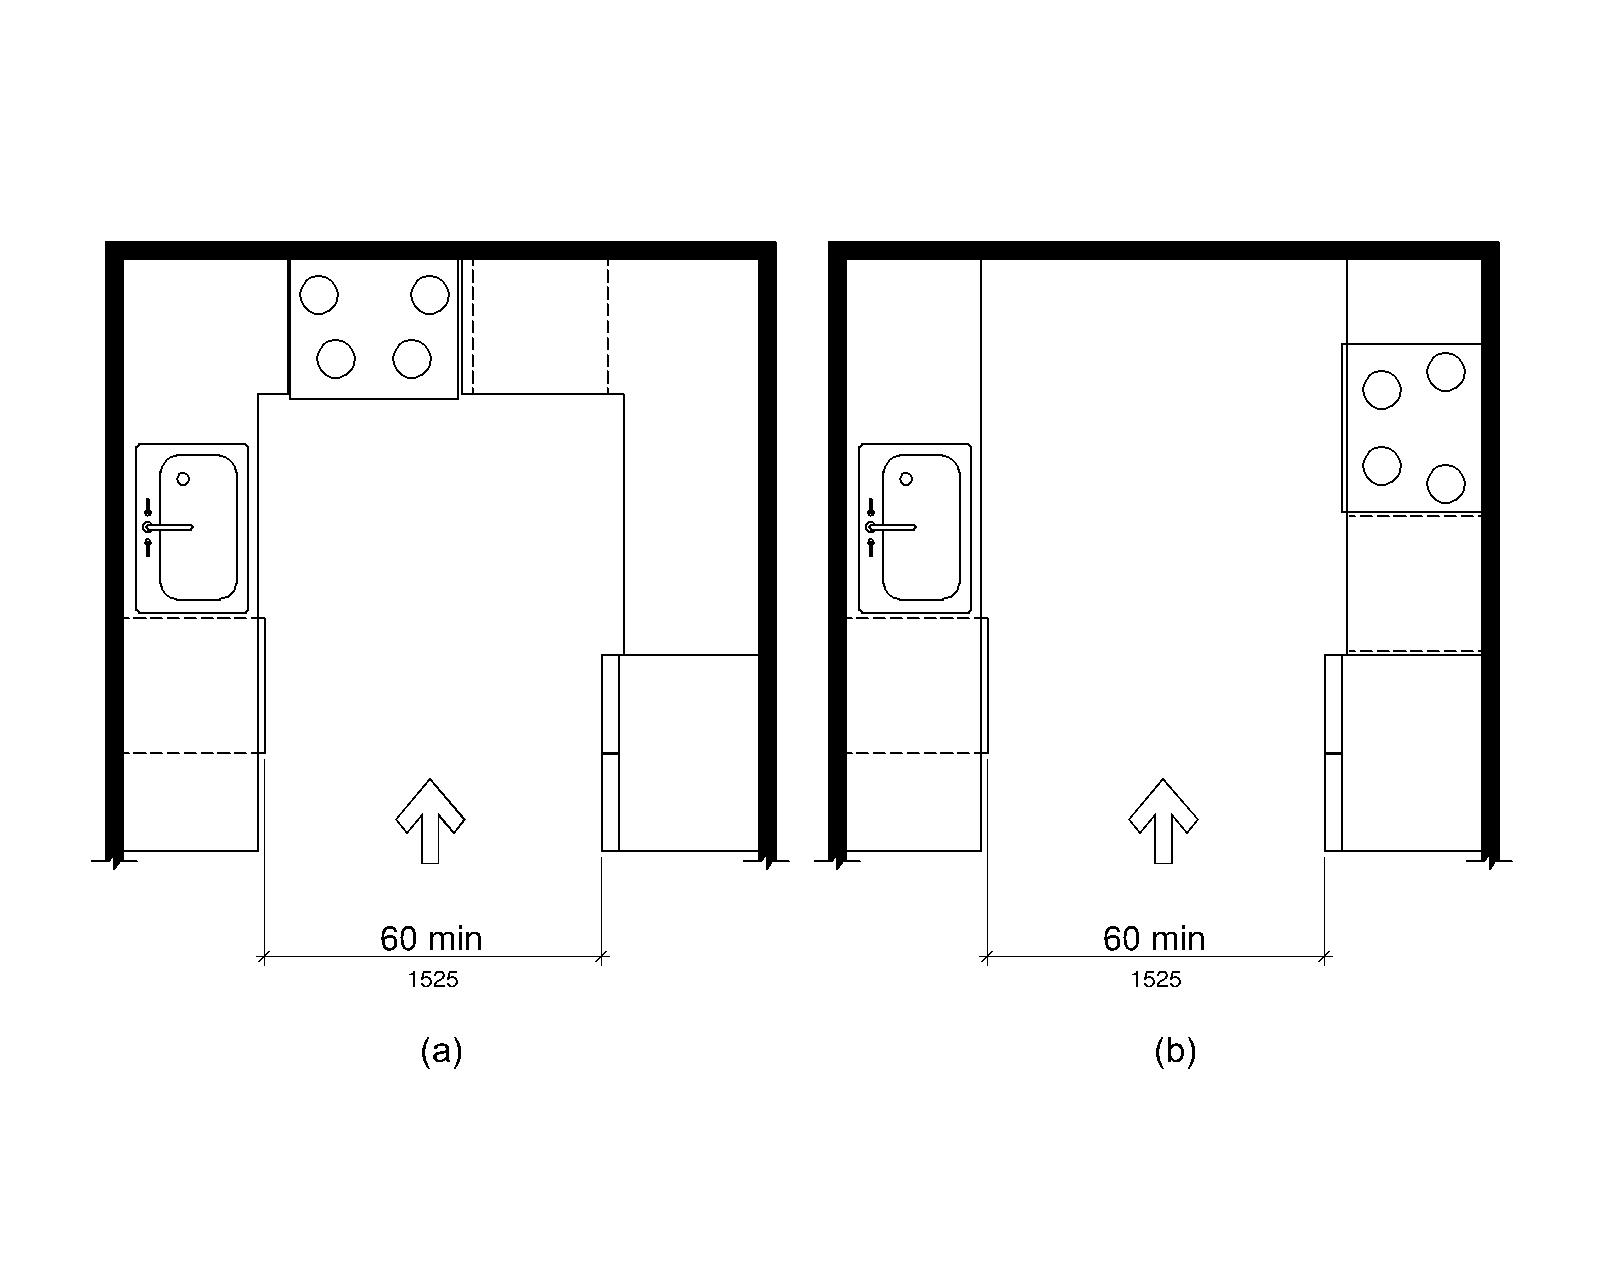 Figure (a) is a plan view of a galley with appliances and cabinets on three sides.Figure (b) is a plan view of a galley with appliances and cabinets on two opposites with a wall at the rear.The width of the galley entry opening is 60 inches (1525 mm) minimum.